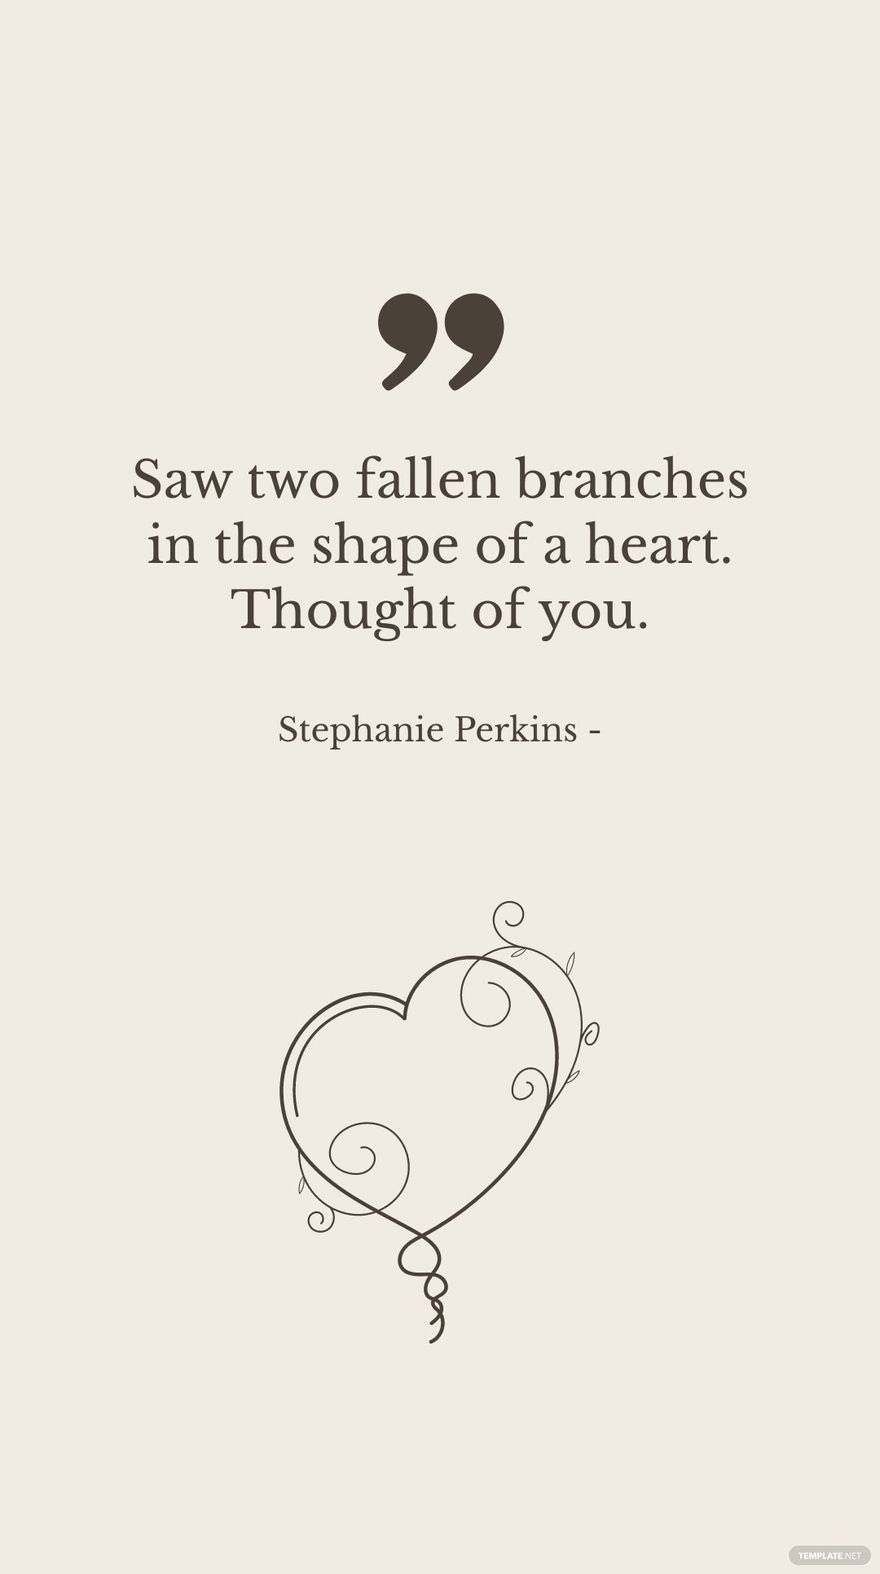 Free Stephanie Perkins - Saw two fallen branches in the shape of a heart. Thought of you. in JPG